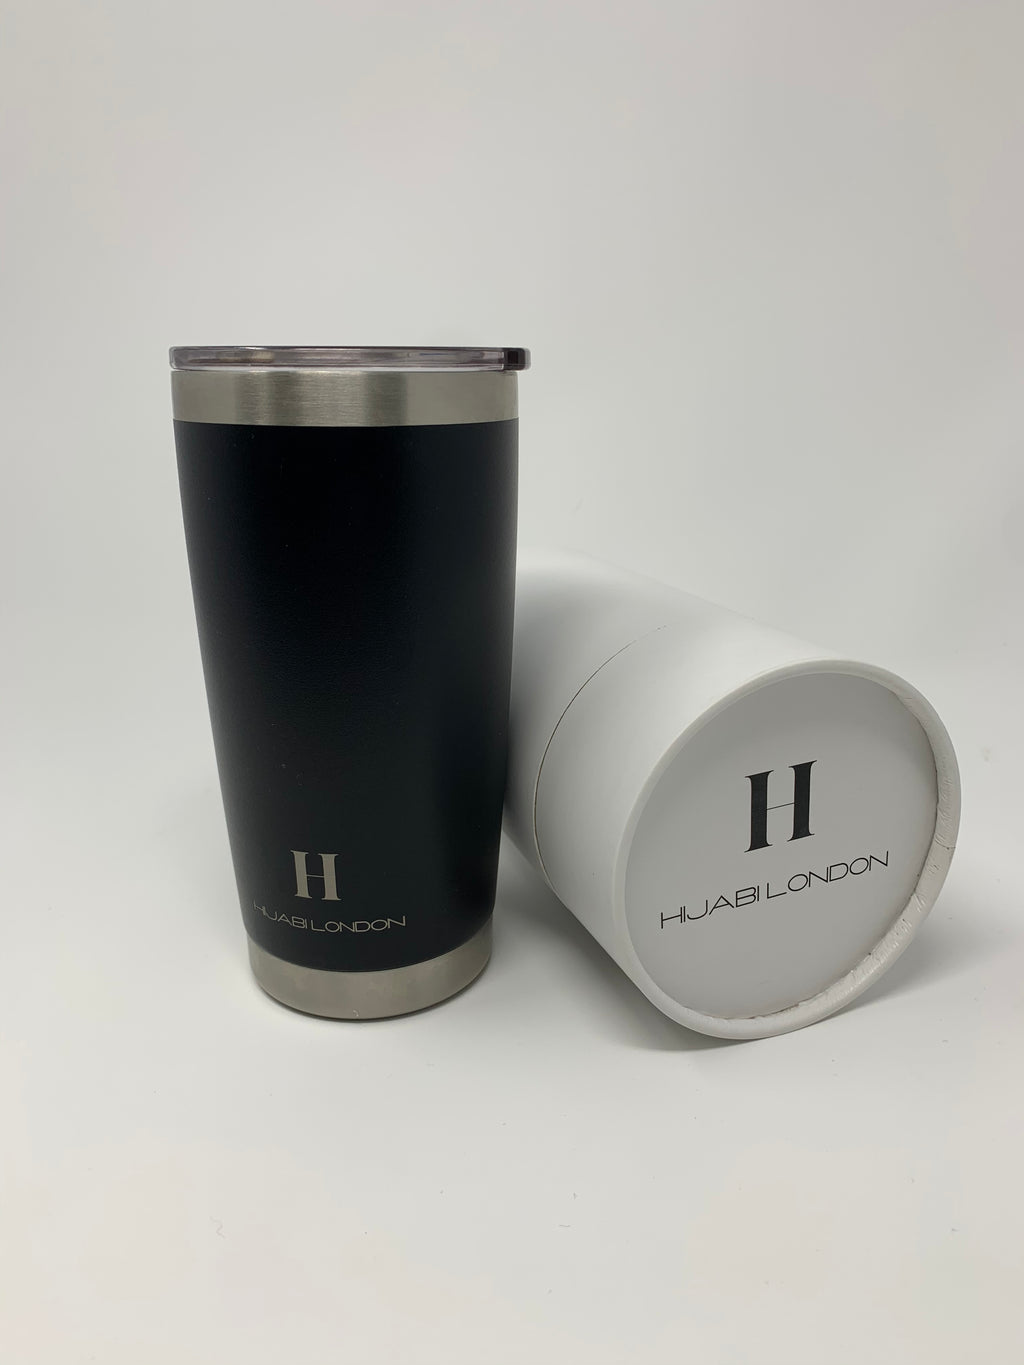 ❗️HijabiLondon Stainless Steel Thermal Cup